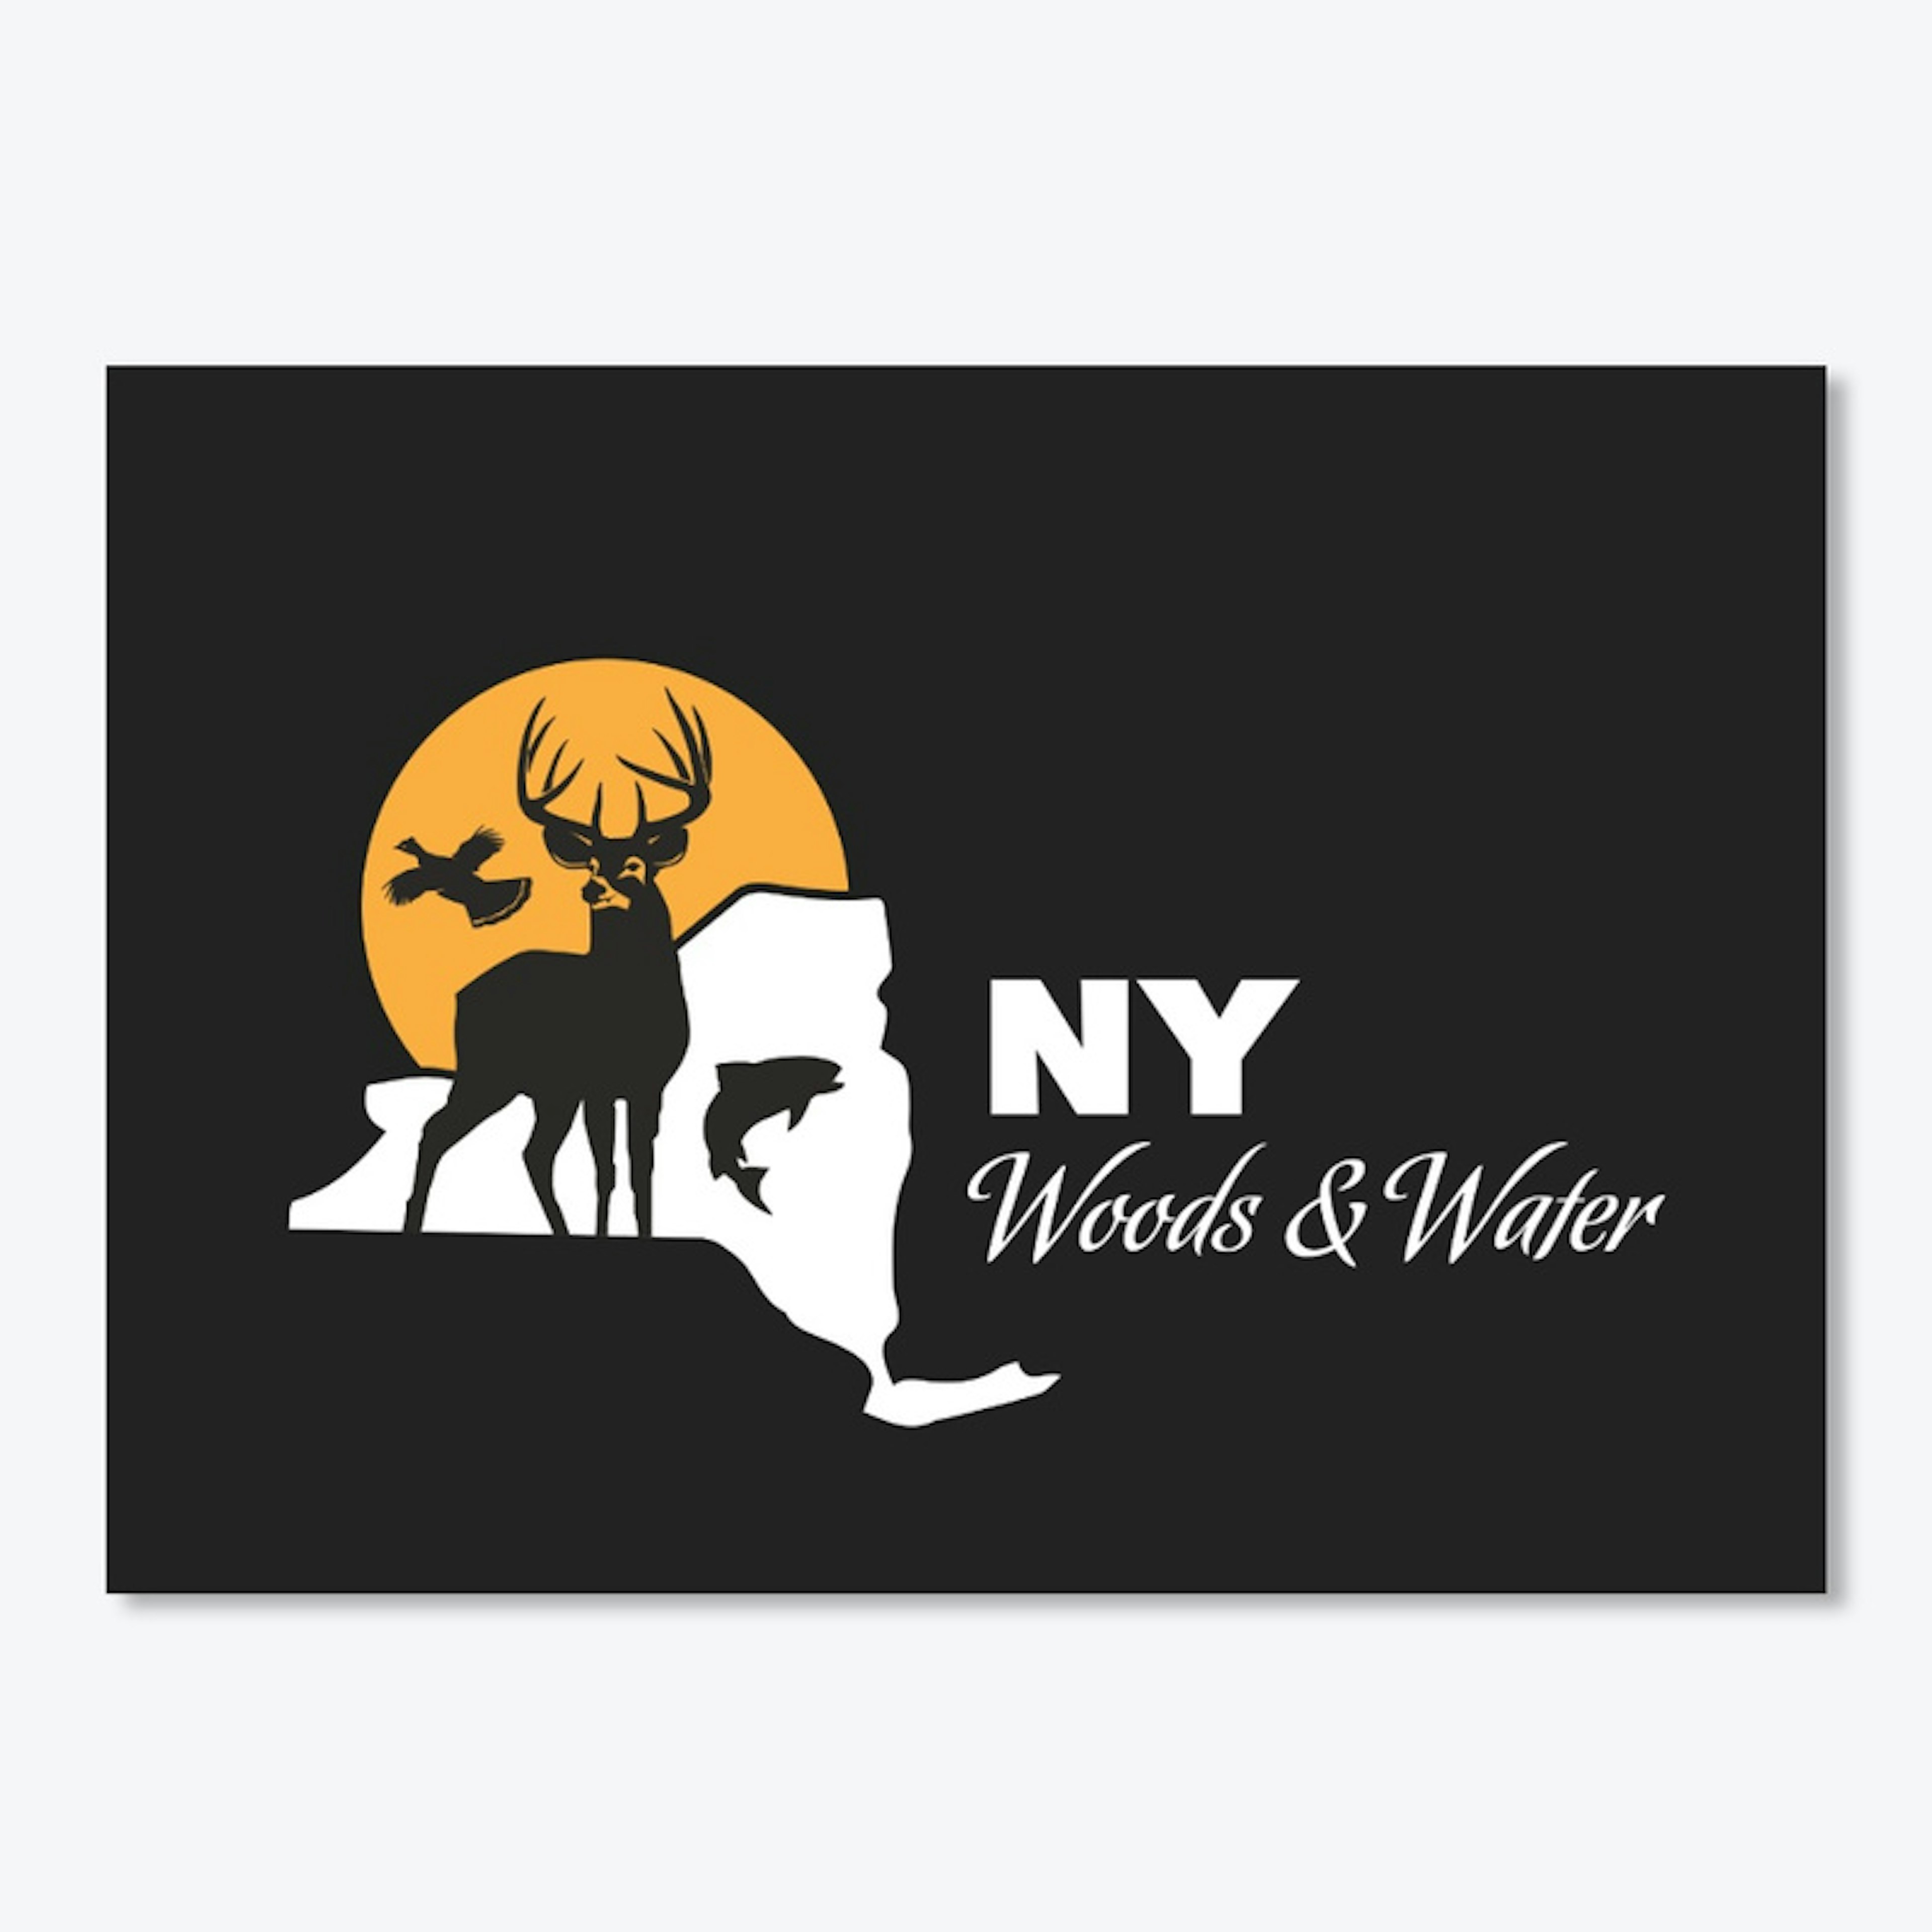 NY Woods & Water - Version 0